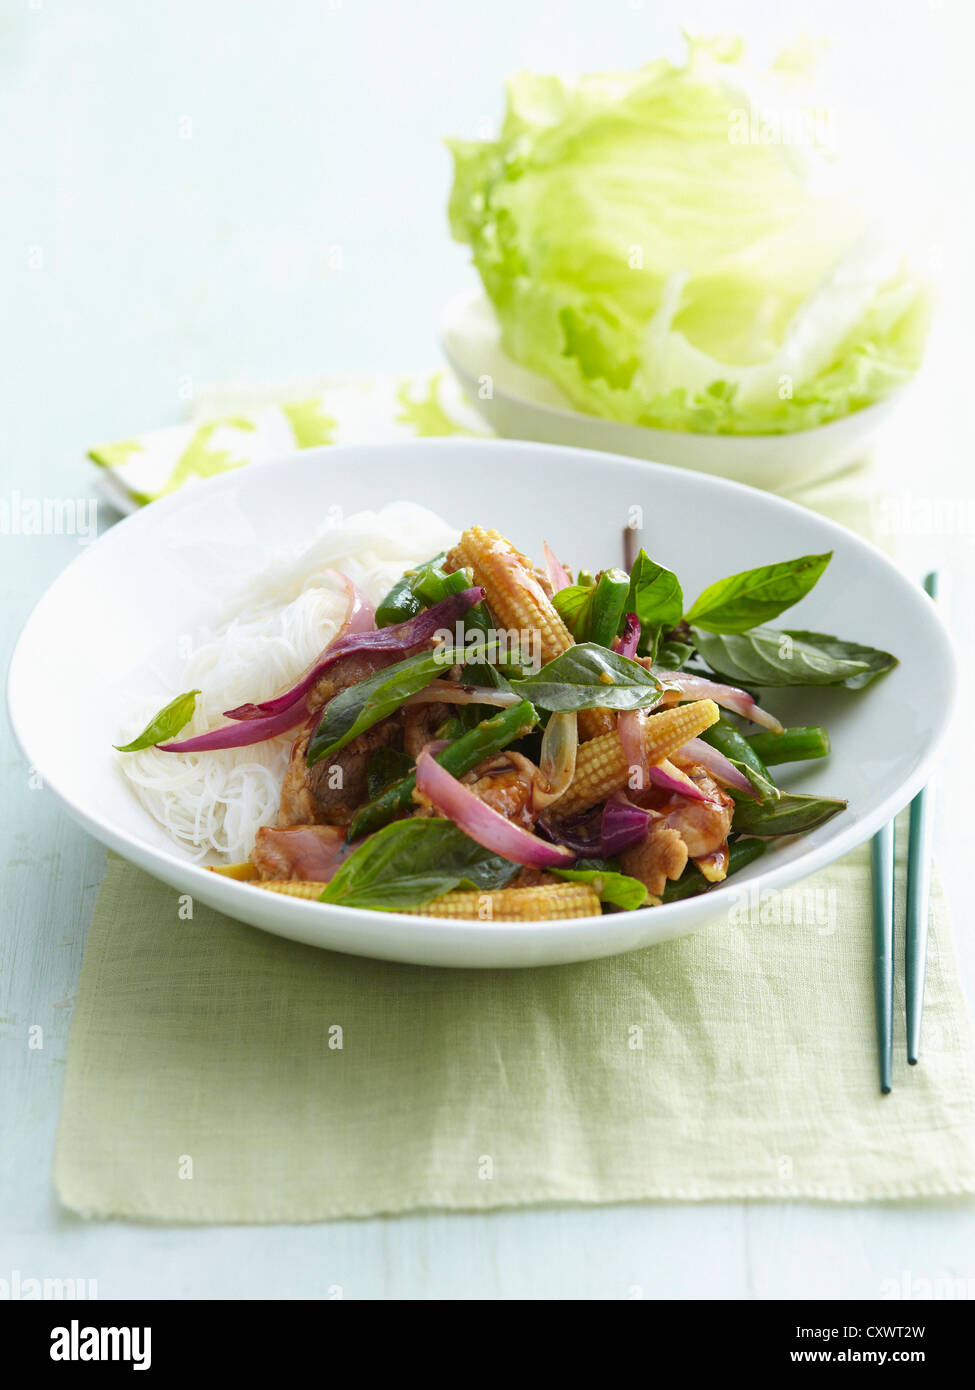 Plate of baby corn, herbs and rice Stock Photo